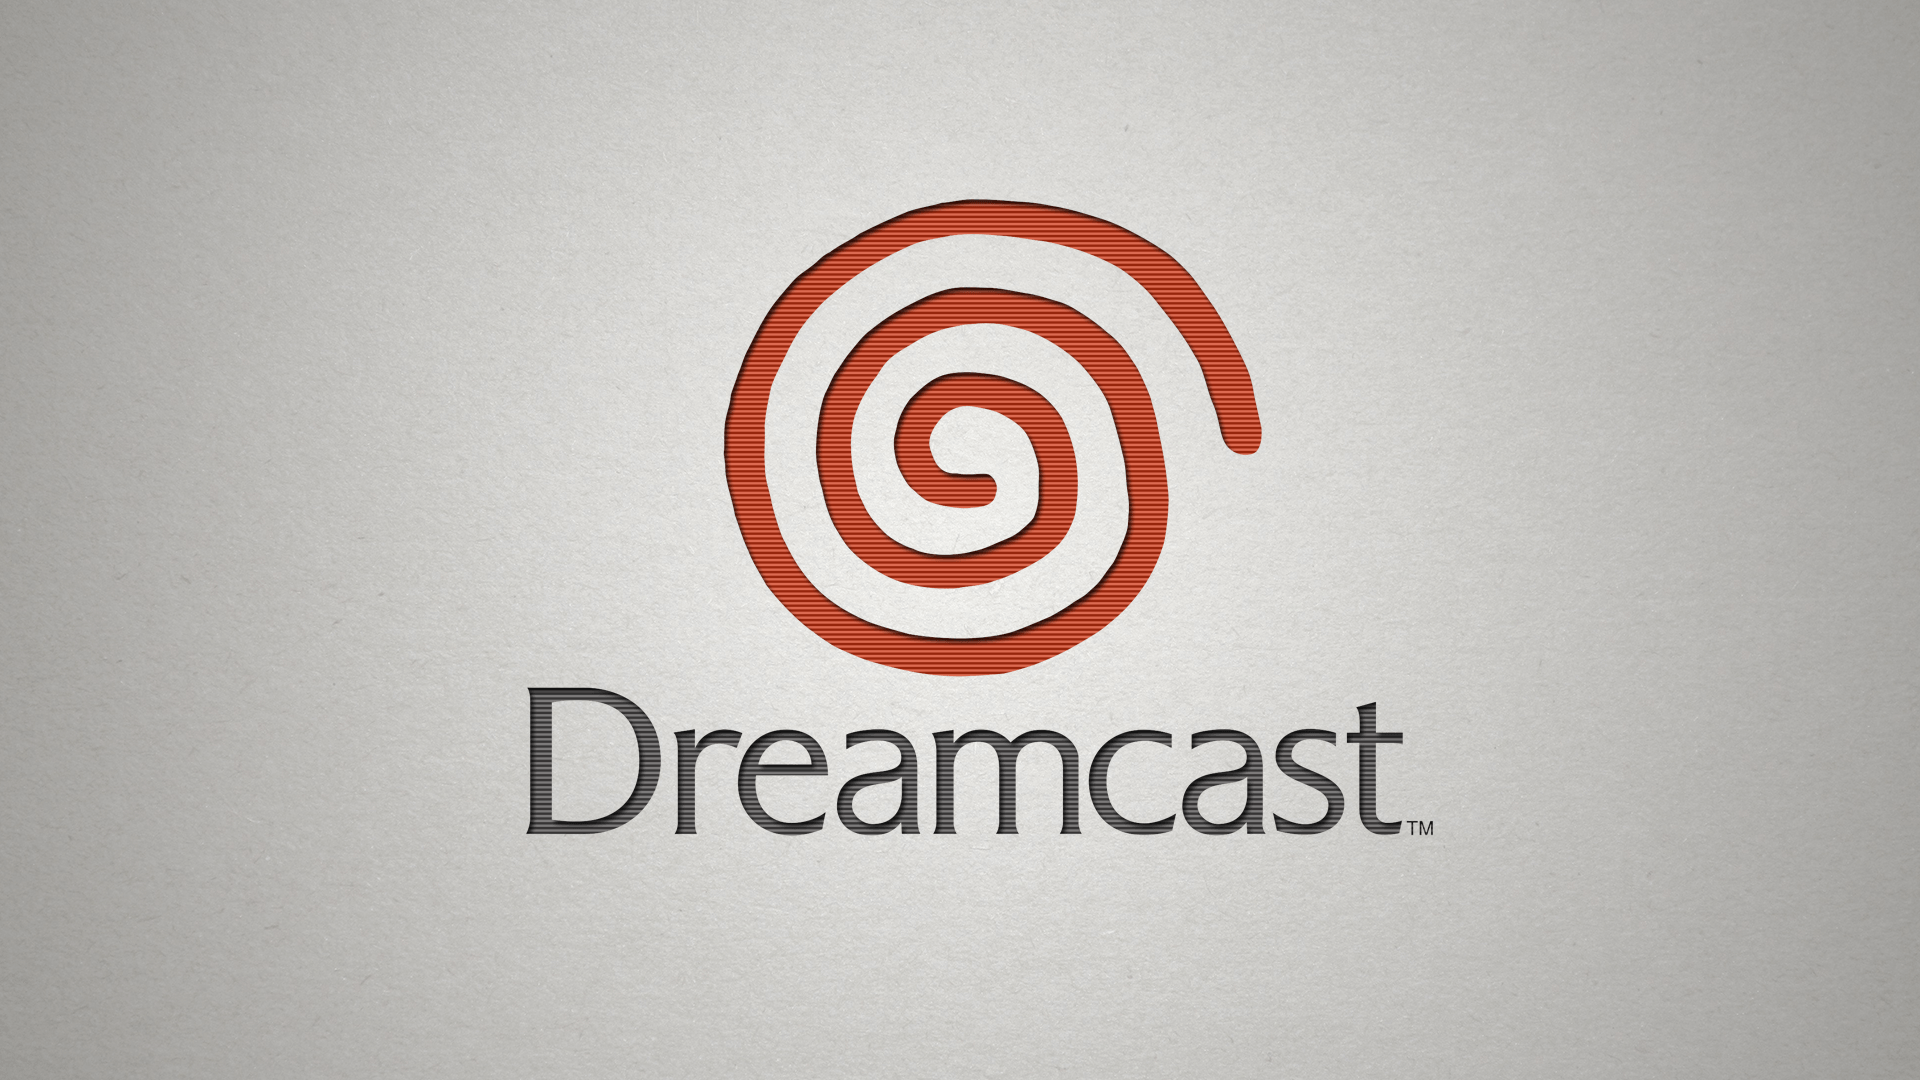 Dreamcast Full HD Wallpaper and Background Imagex1080